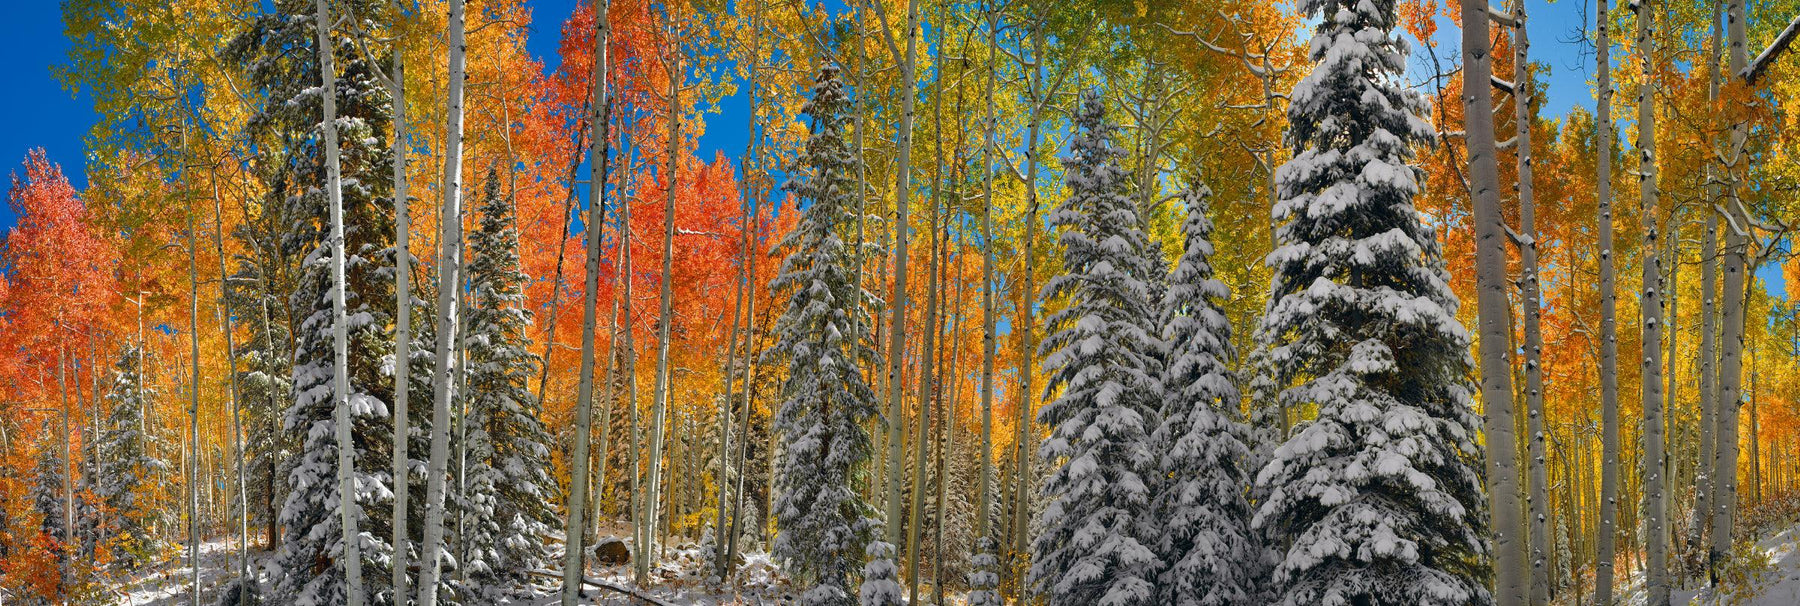 Snow covered pine trees in an Autumn colored forest in Aspen Colorado